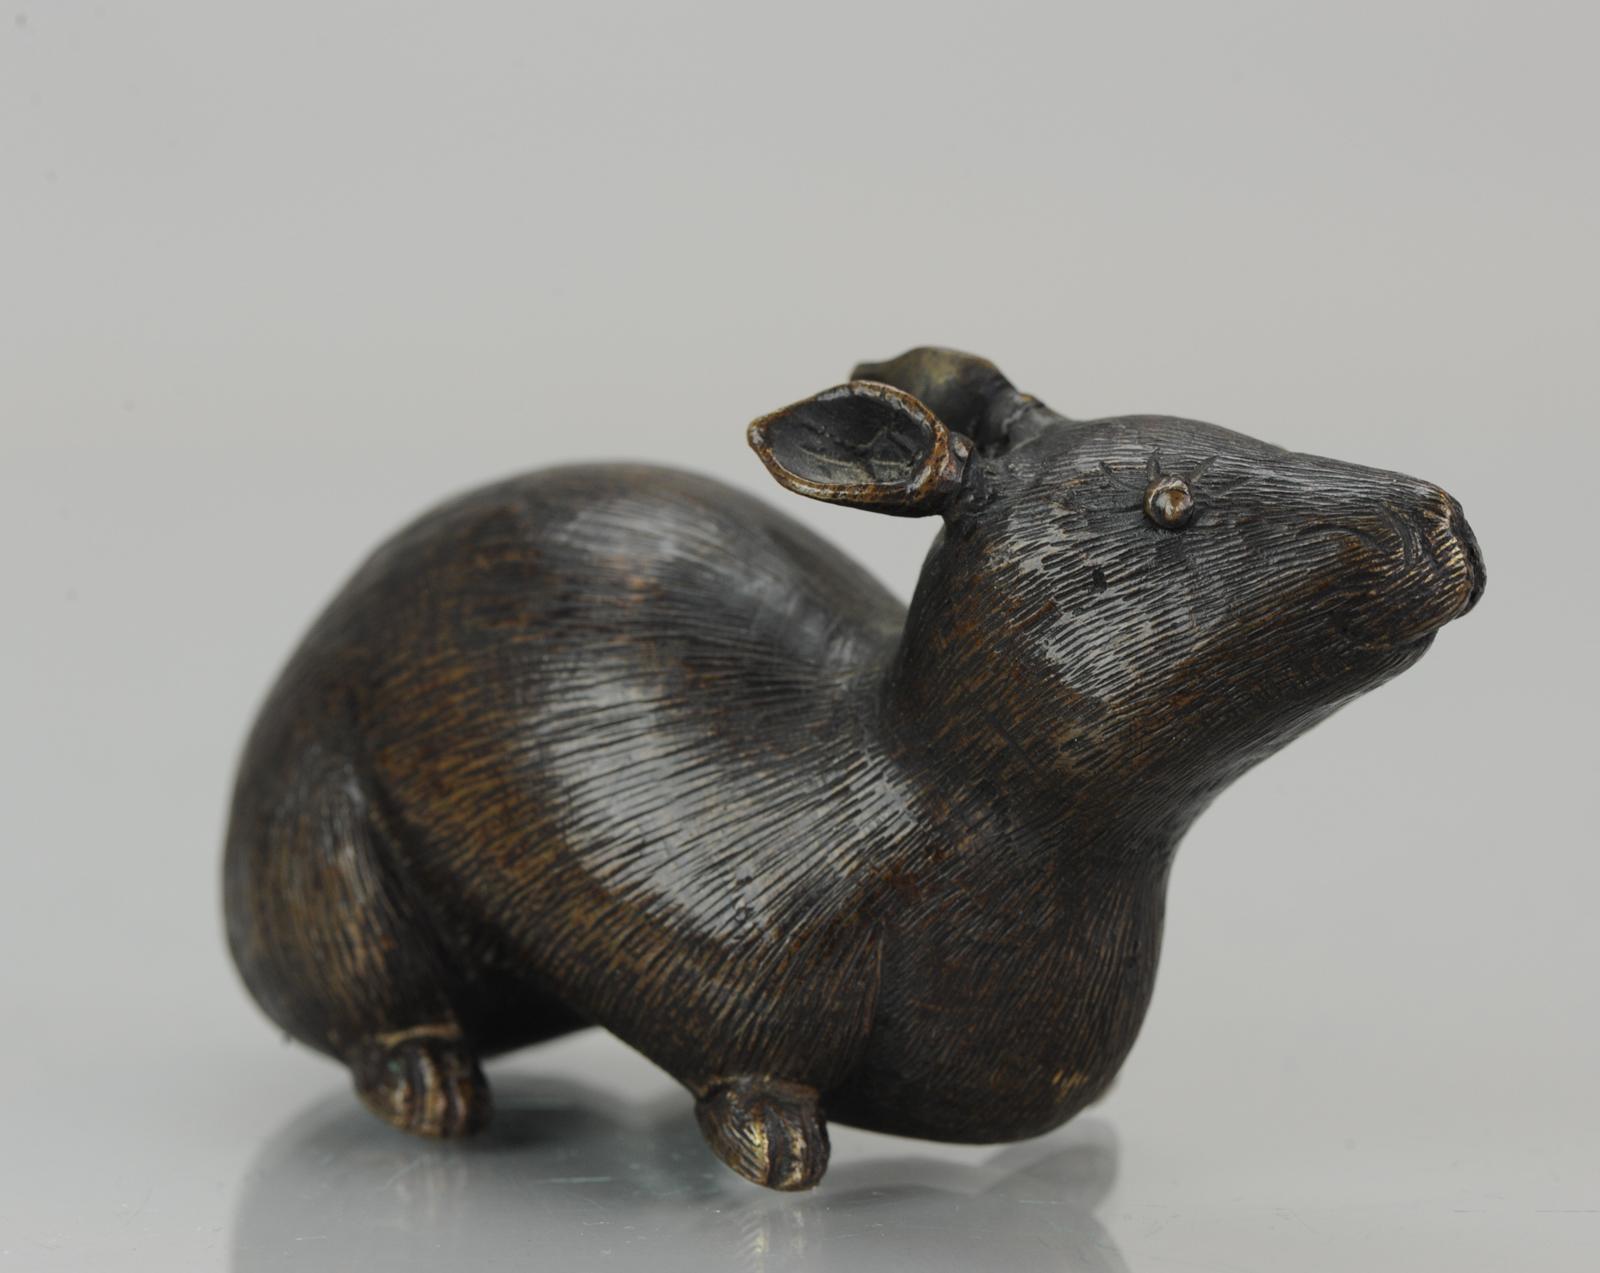 Nicely made artifact/Okimono of a Rat. In bronze with brown patina, representing a rat.

Okimono (置物, oki-mono) is a Japanese term meaning 